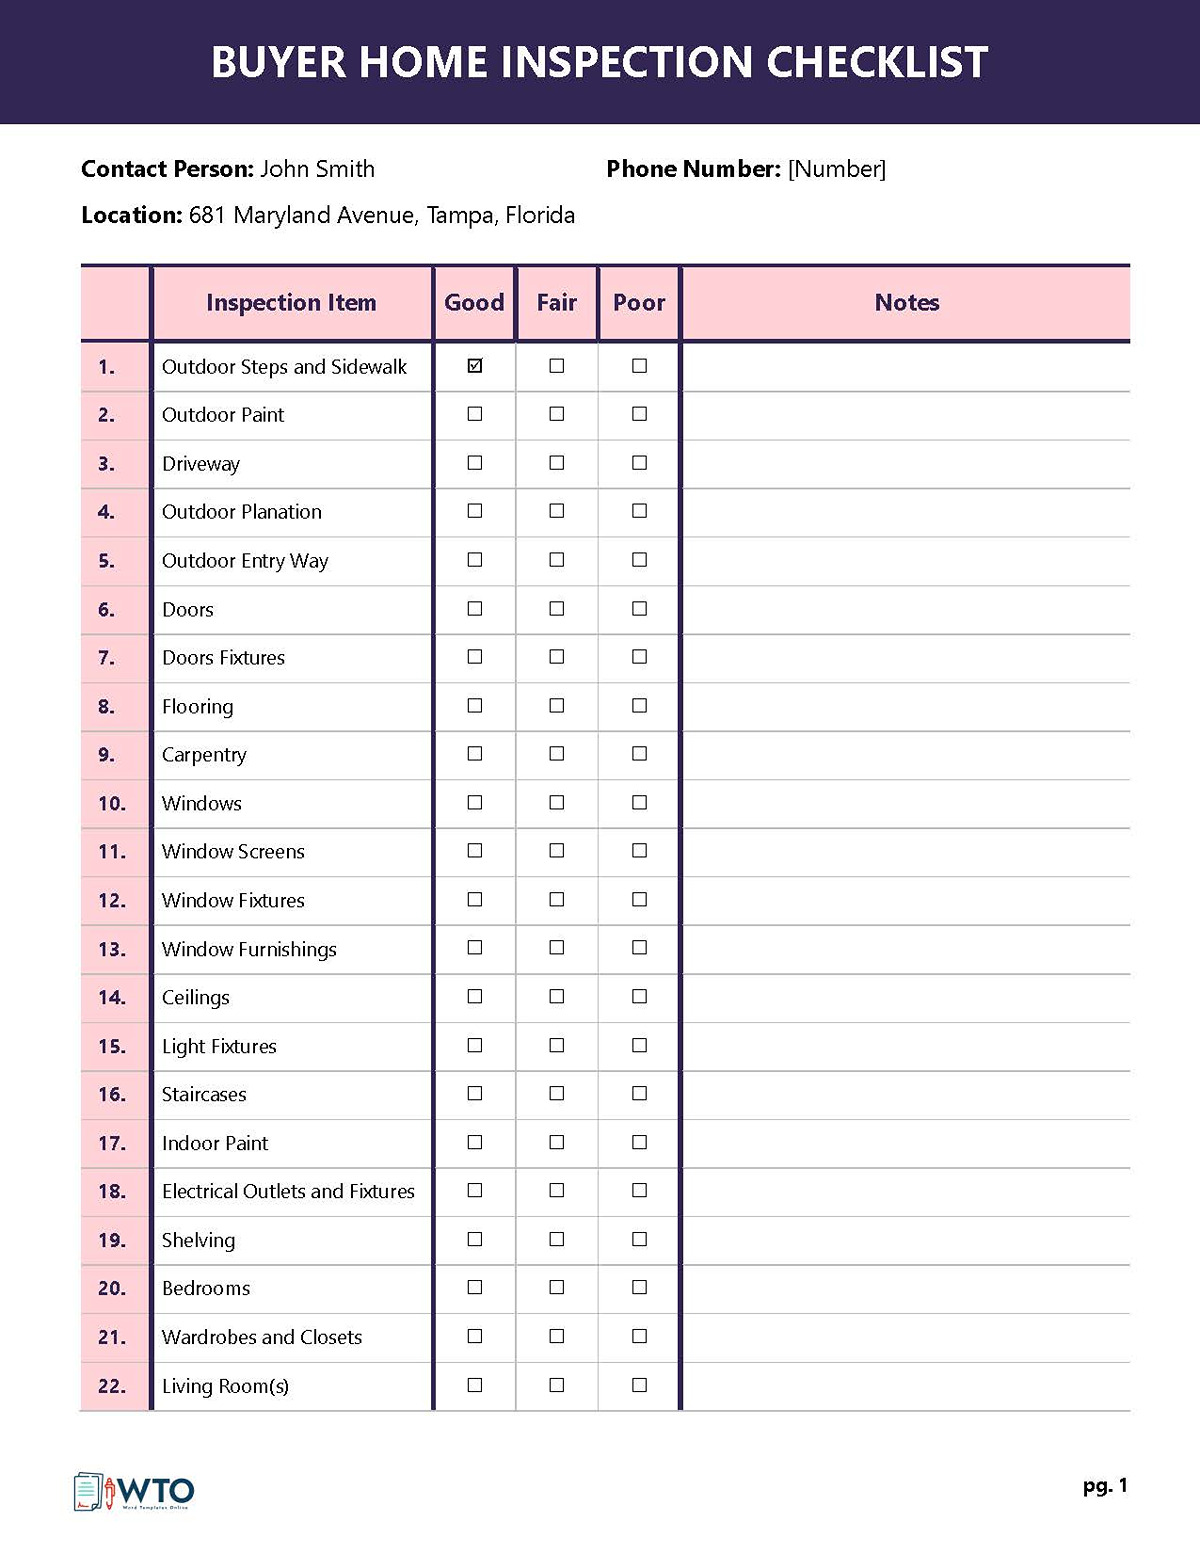 Home Inspection Checklist - Printable Format